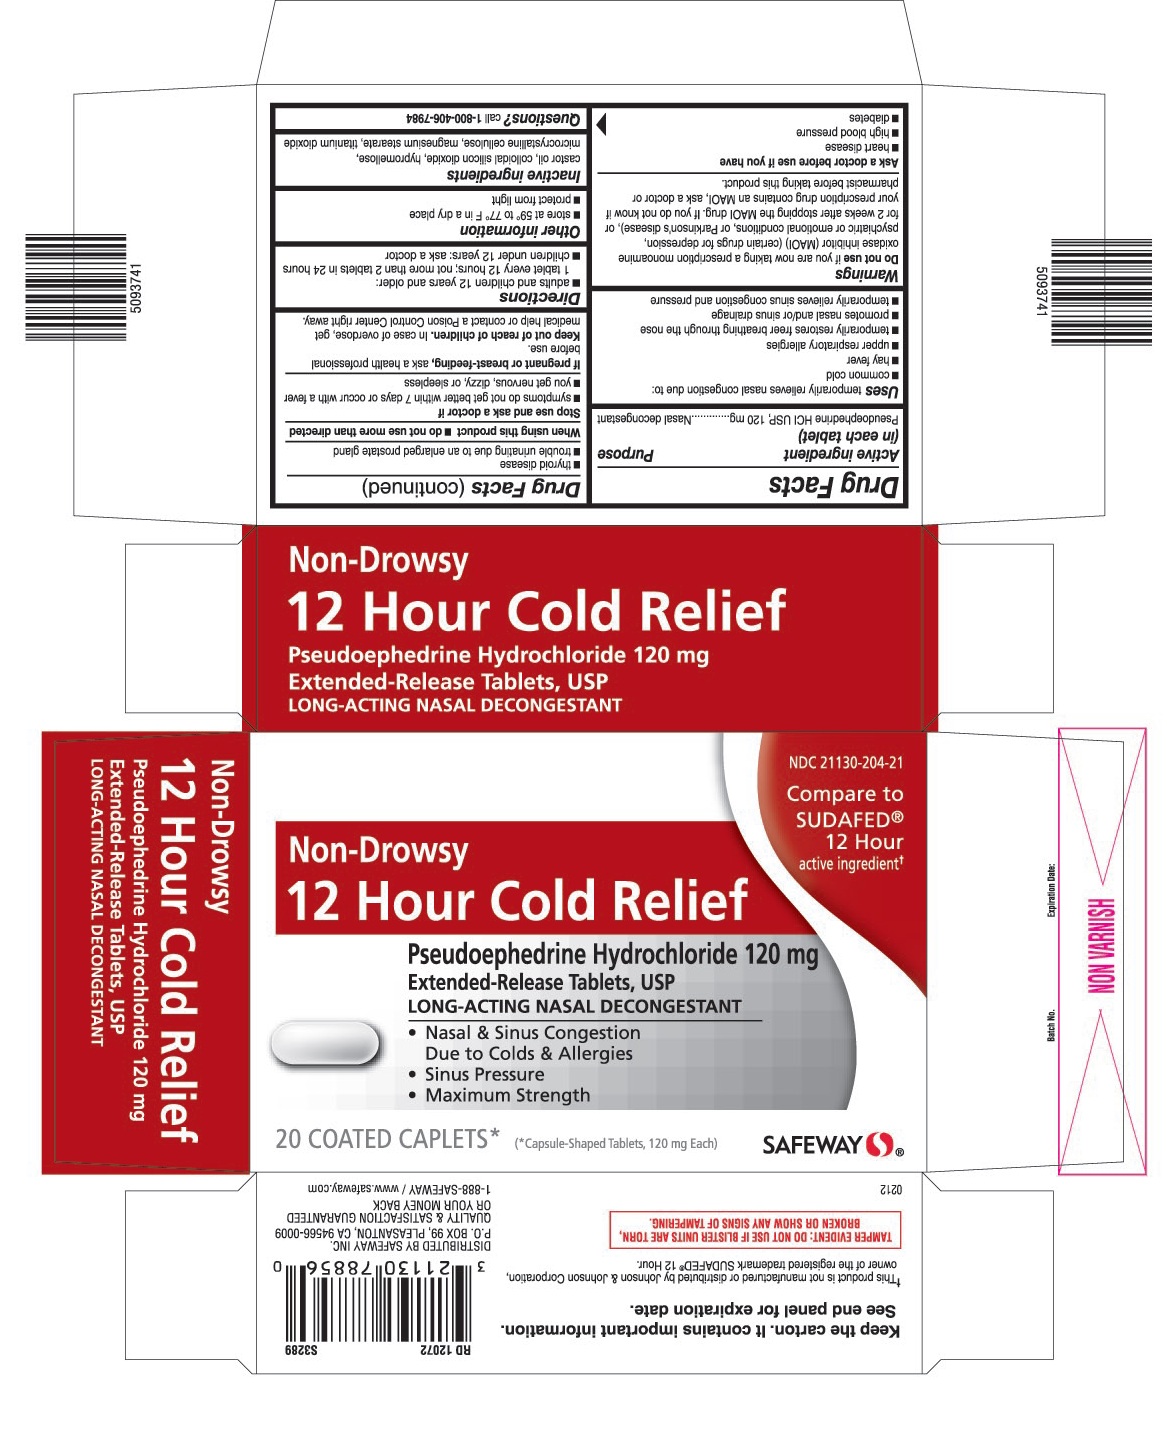 This is the 20 count blister carton label for Safeway Pseudoephedrine HCl 120 mg extended release tablets, USP.